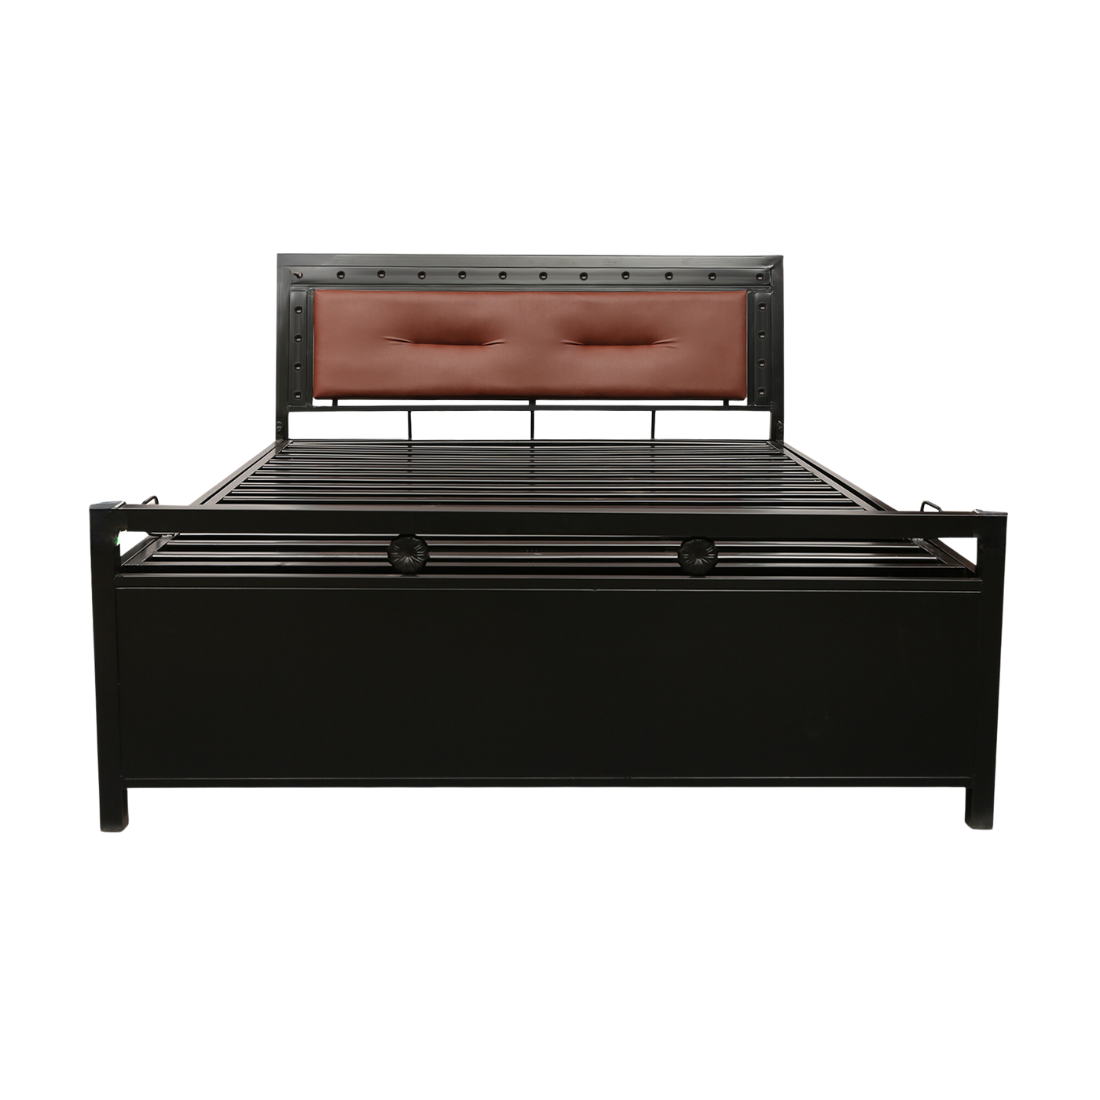 Daisy Hydraulic Storage King Metal Bed with Brown Cushion Headrest (Color - Black)